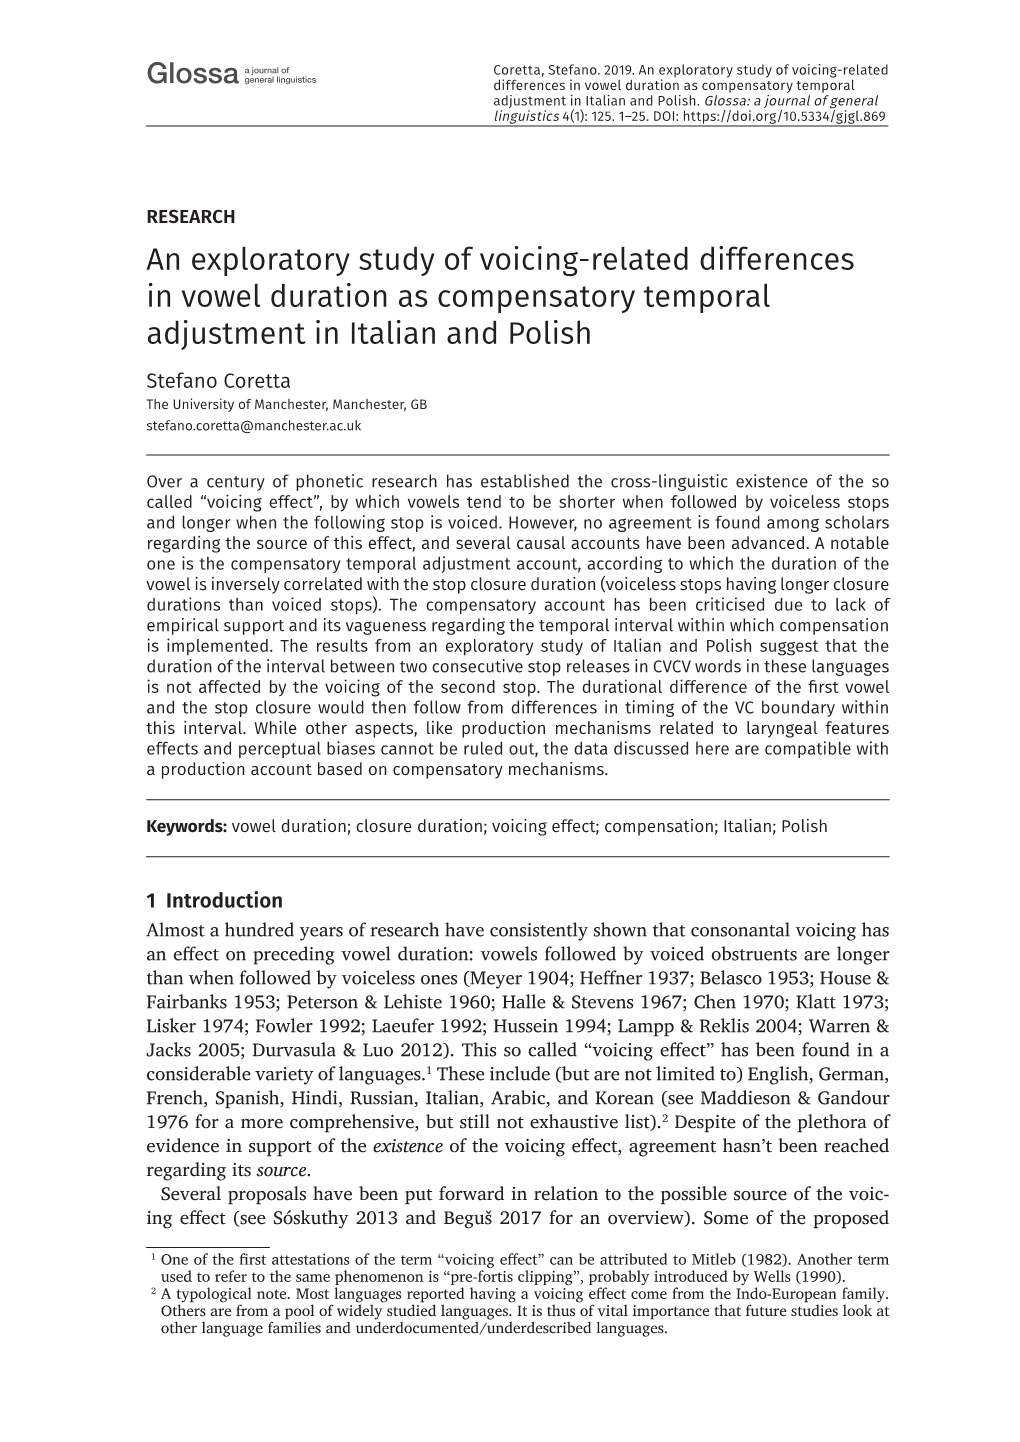 An Exploratory Study of Voicing-Related Differences in Vowel